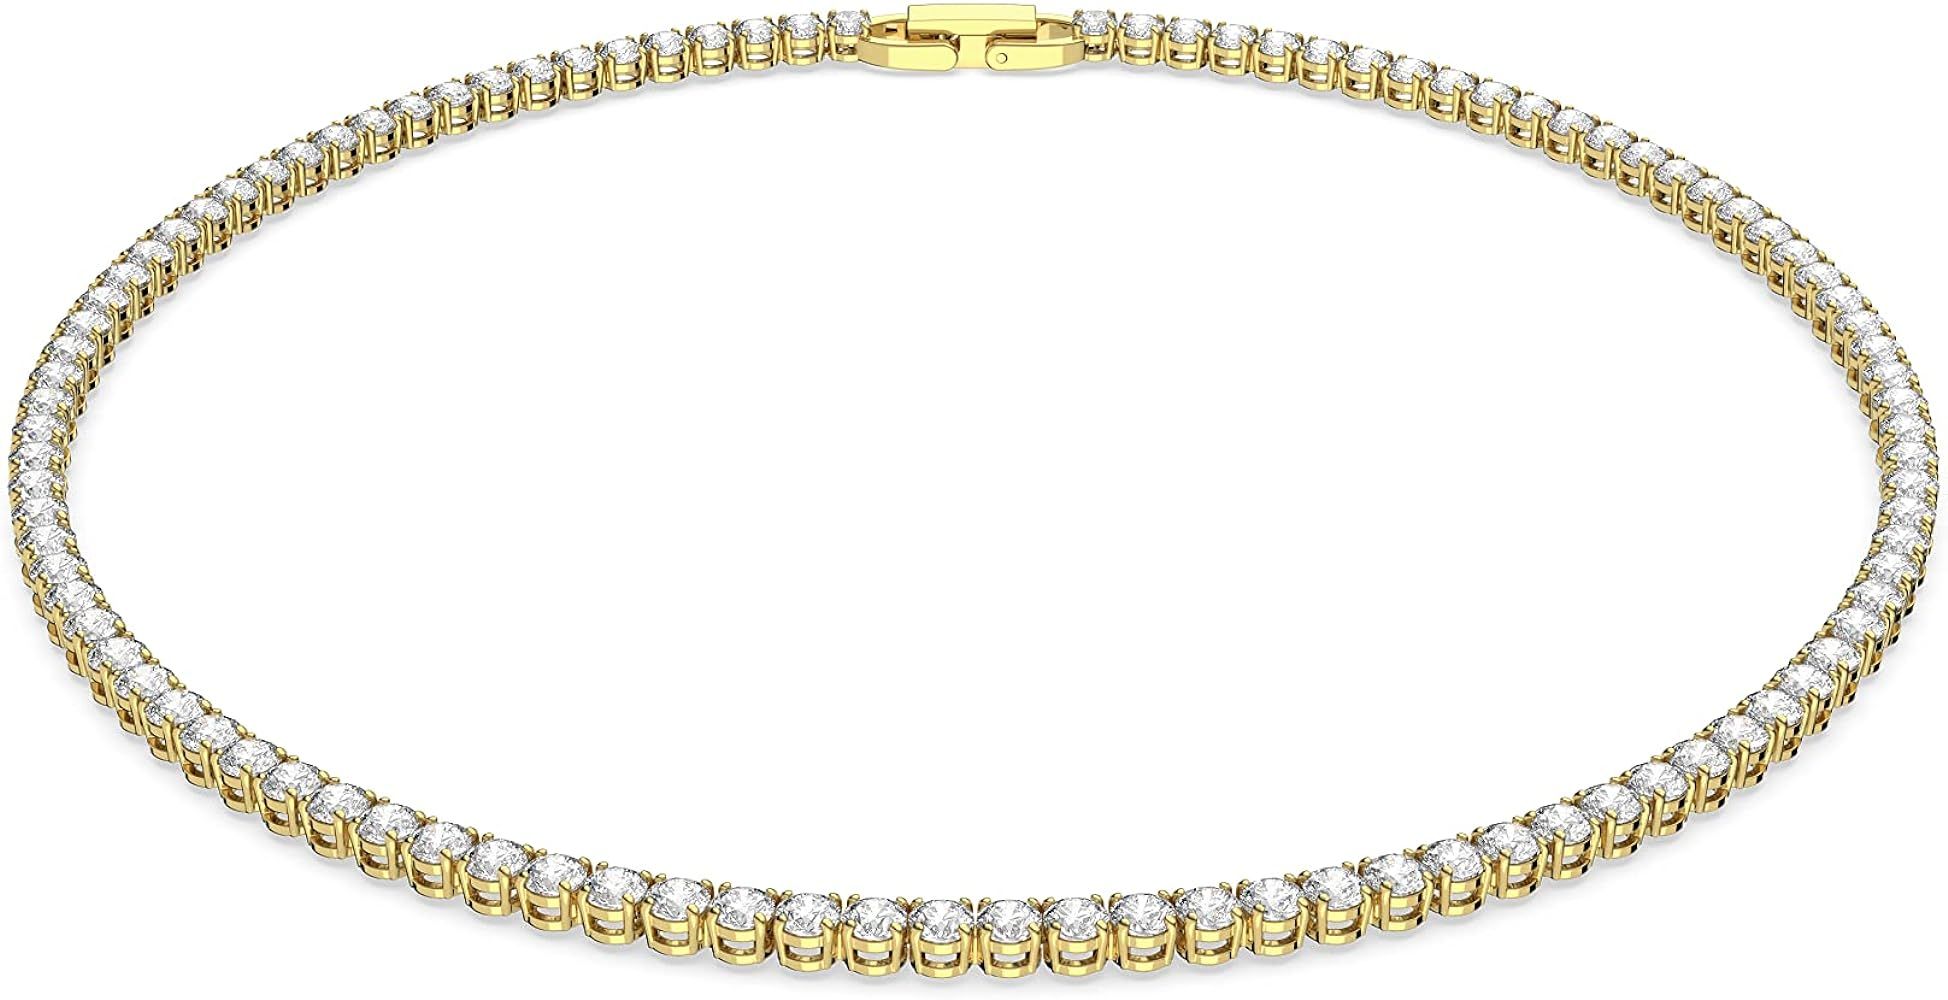 Swarovski Matrix Crystal Necklace Collection, Pink, Yellow, and Clear Crystals | Amazon (US)